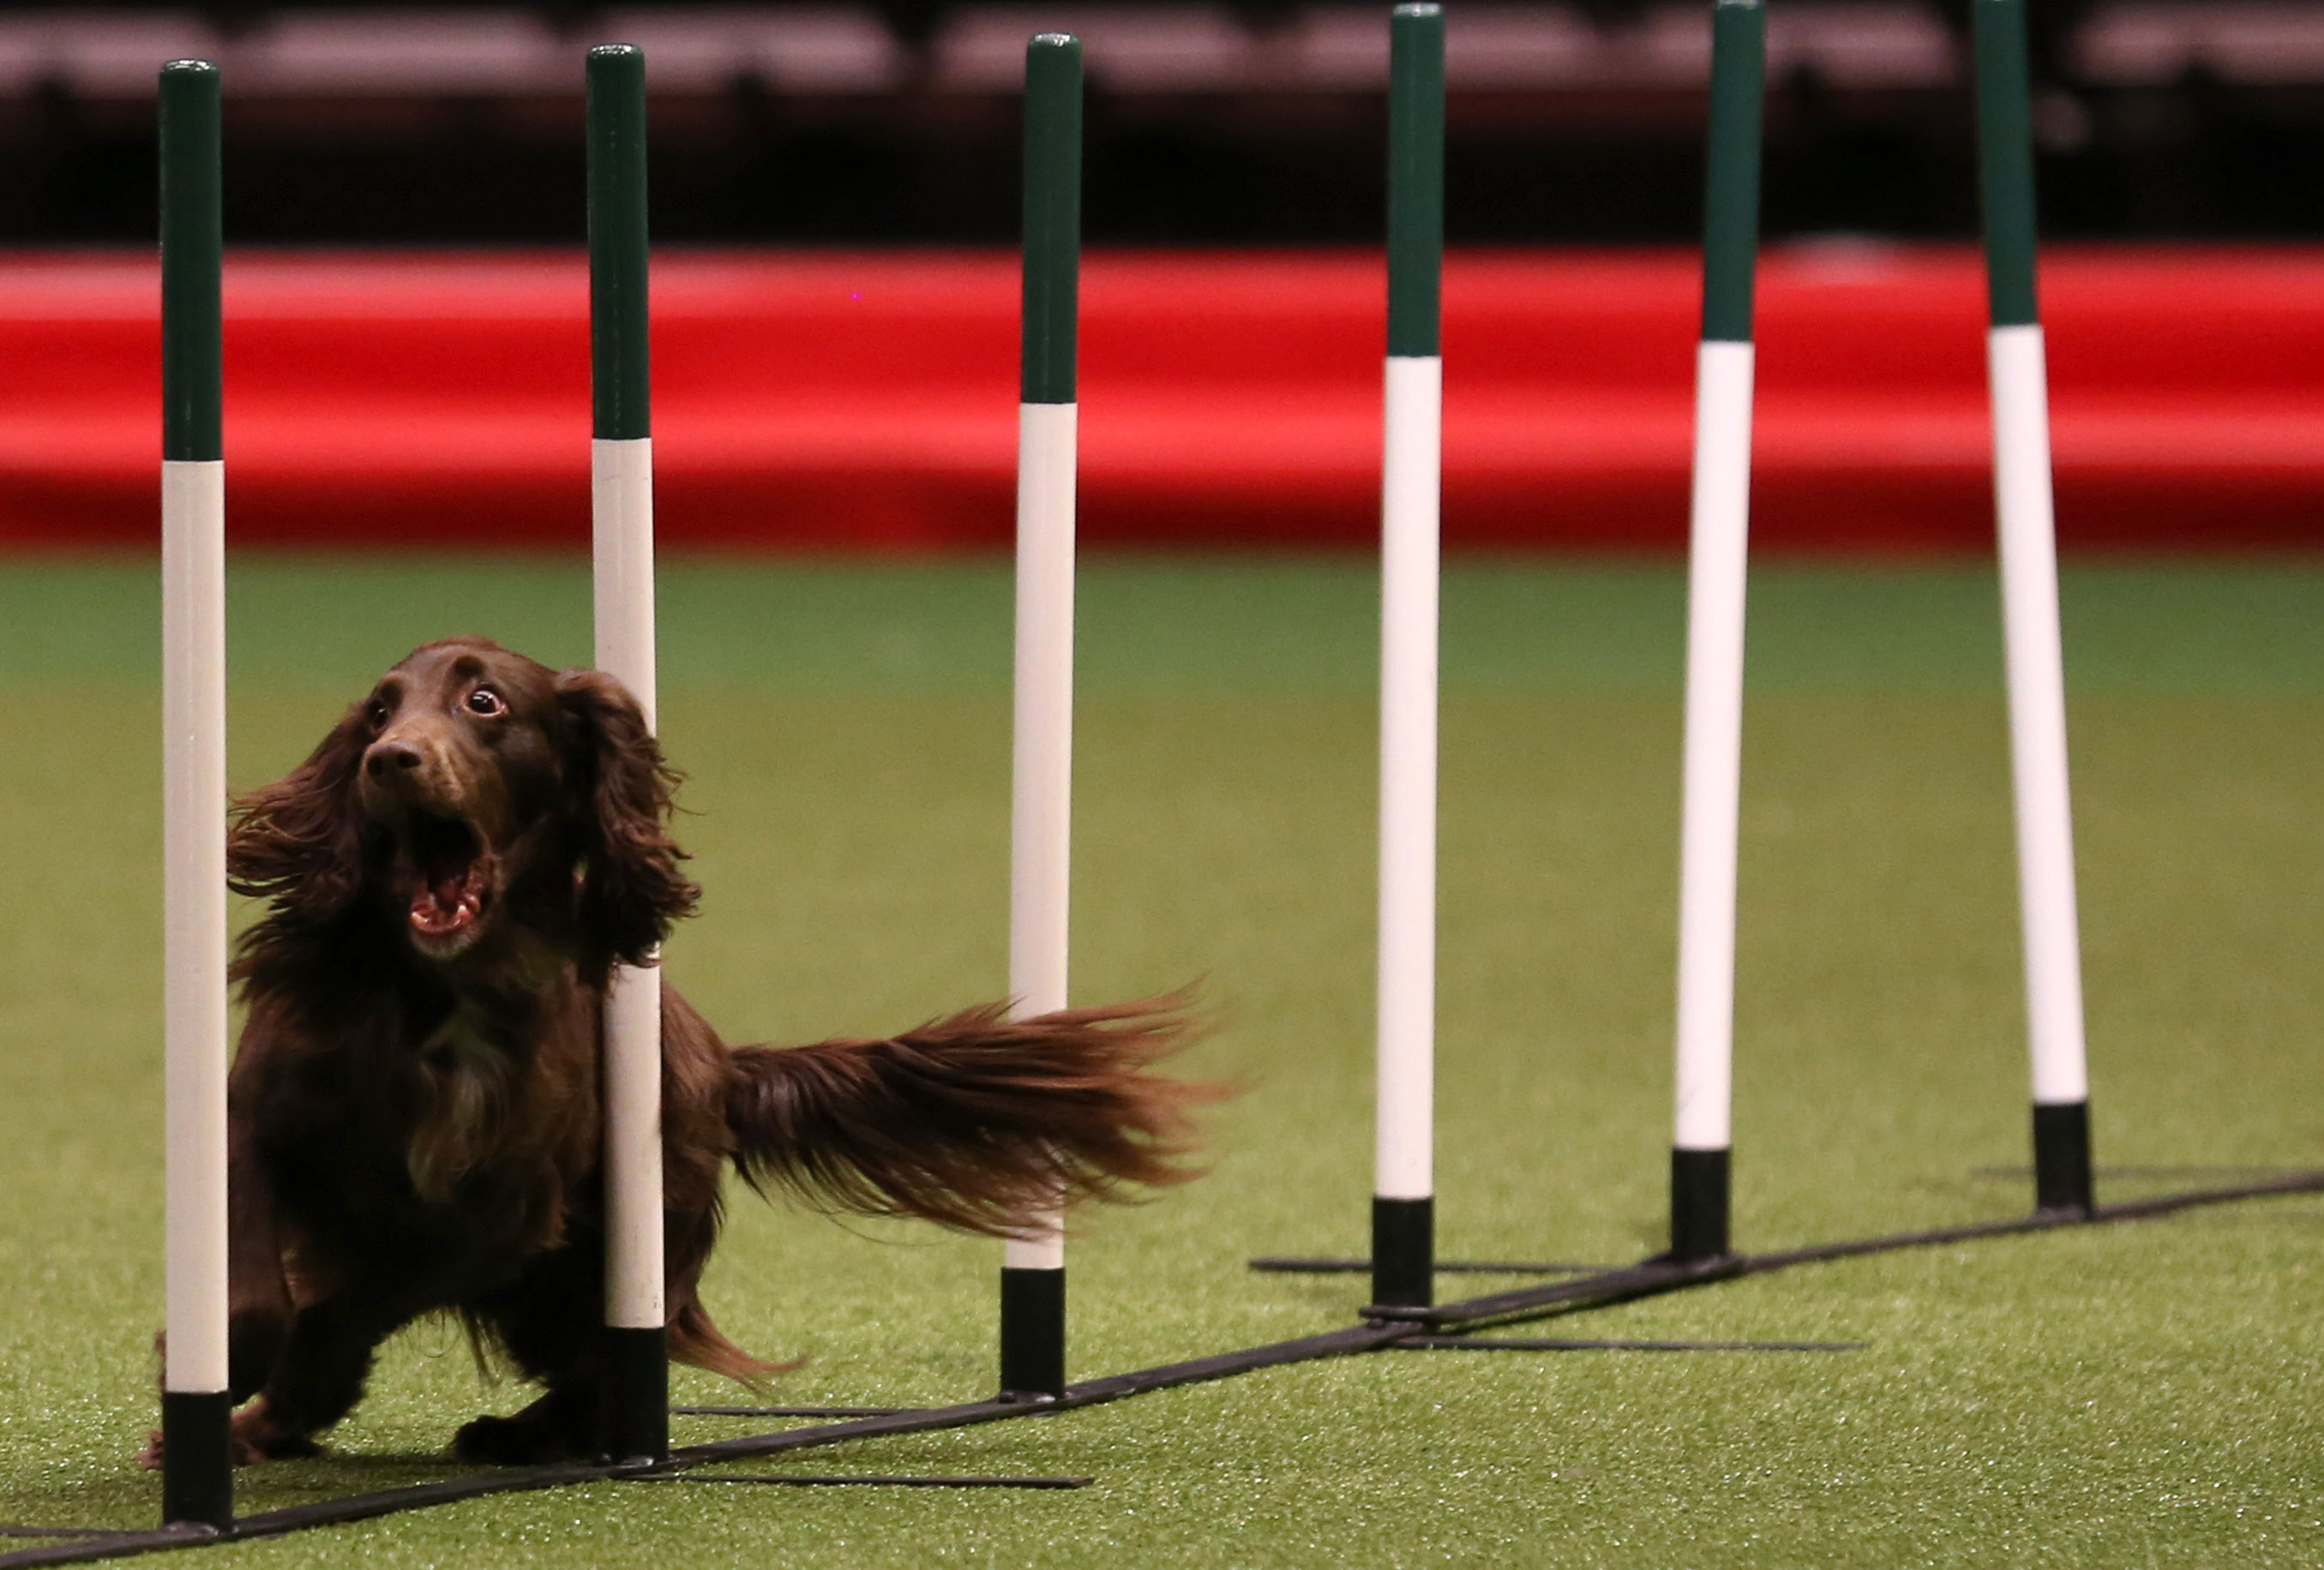 BIRMINGHAM, ENGLAND - MARCH 07:A dog competes in the agility competition on the second day of the Crufts dog show at the NEC on March 7, 2014 in Birmingham, England. Said to be the largest sh